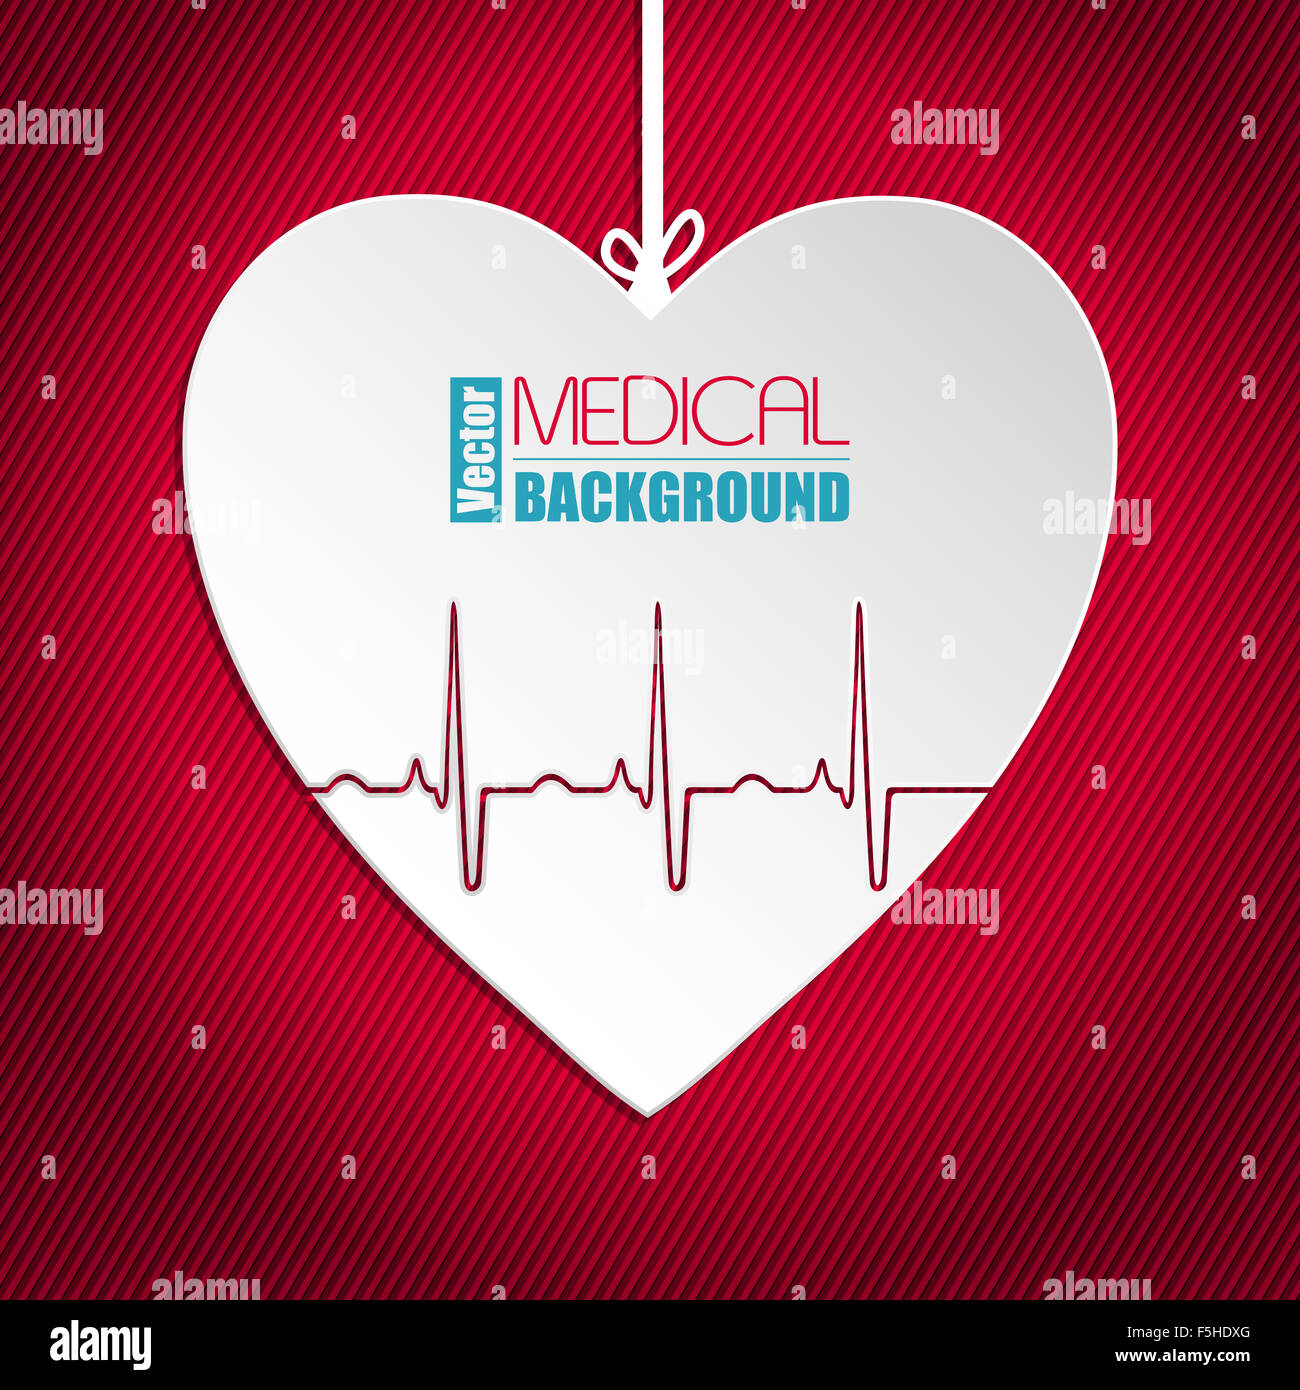 Hanging Ekg heart on striped red background Stock Photo